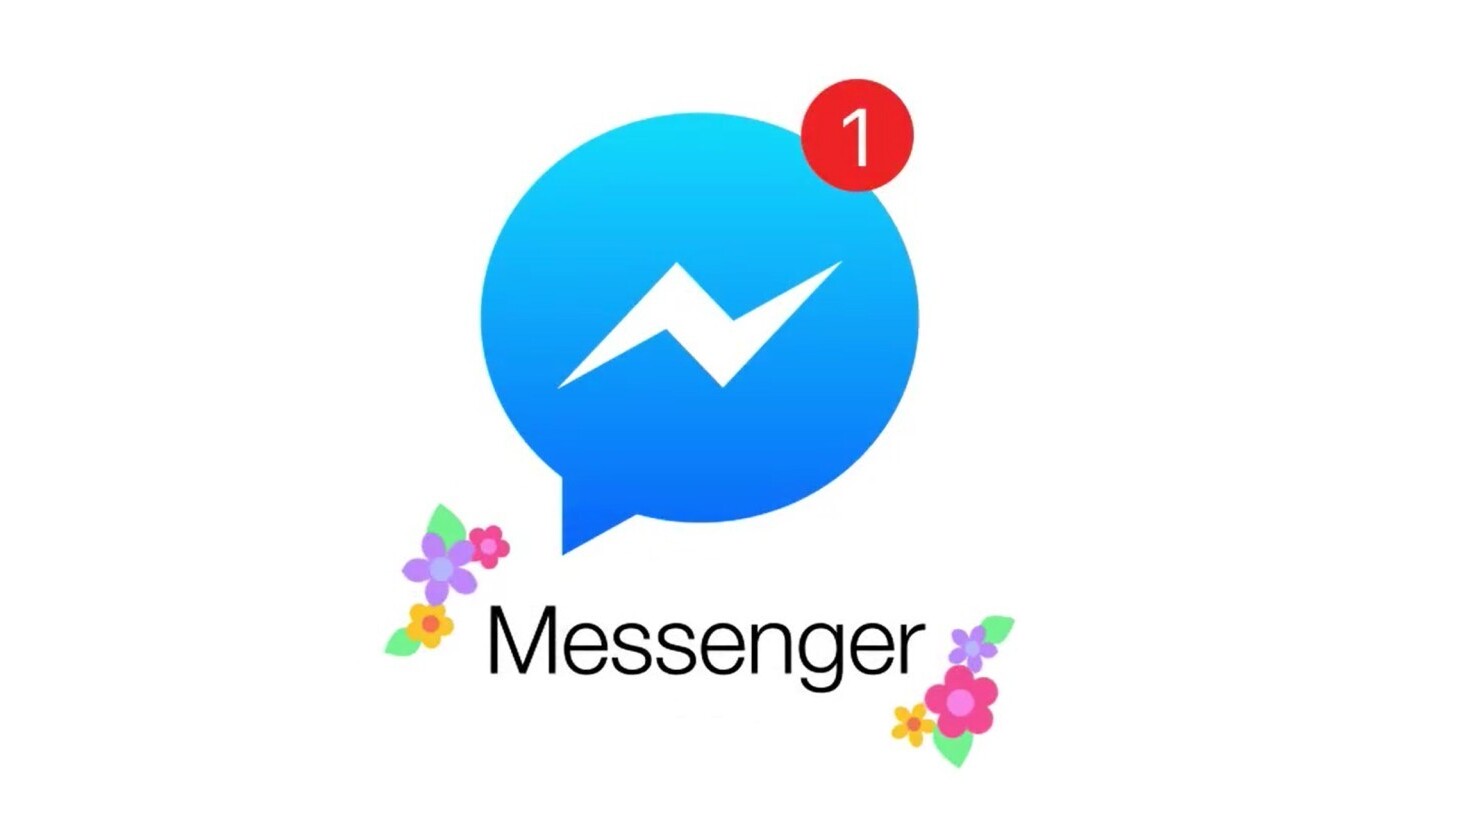 How to use the sleek new version of Facebook Messenger on iOS